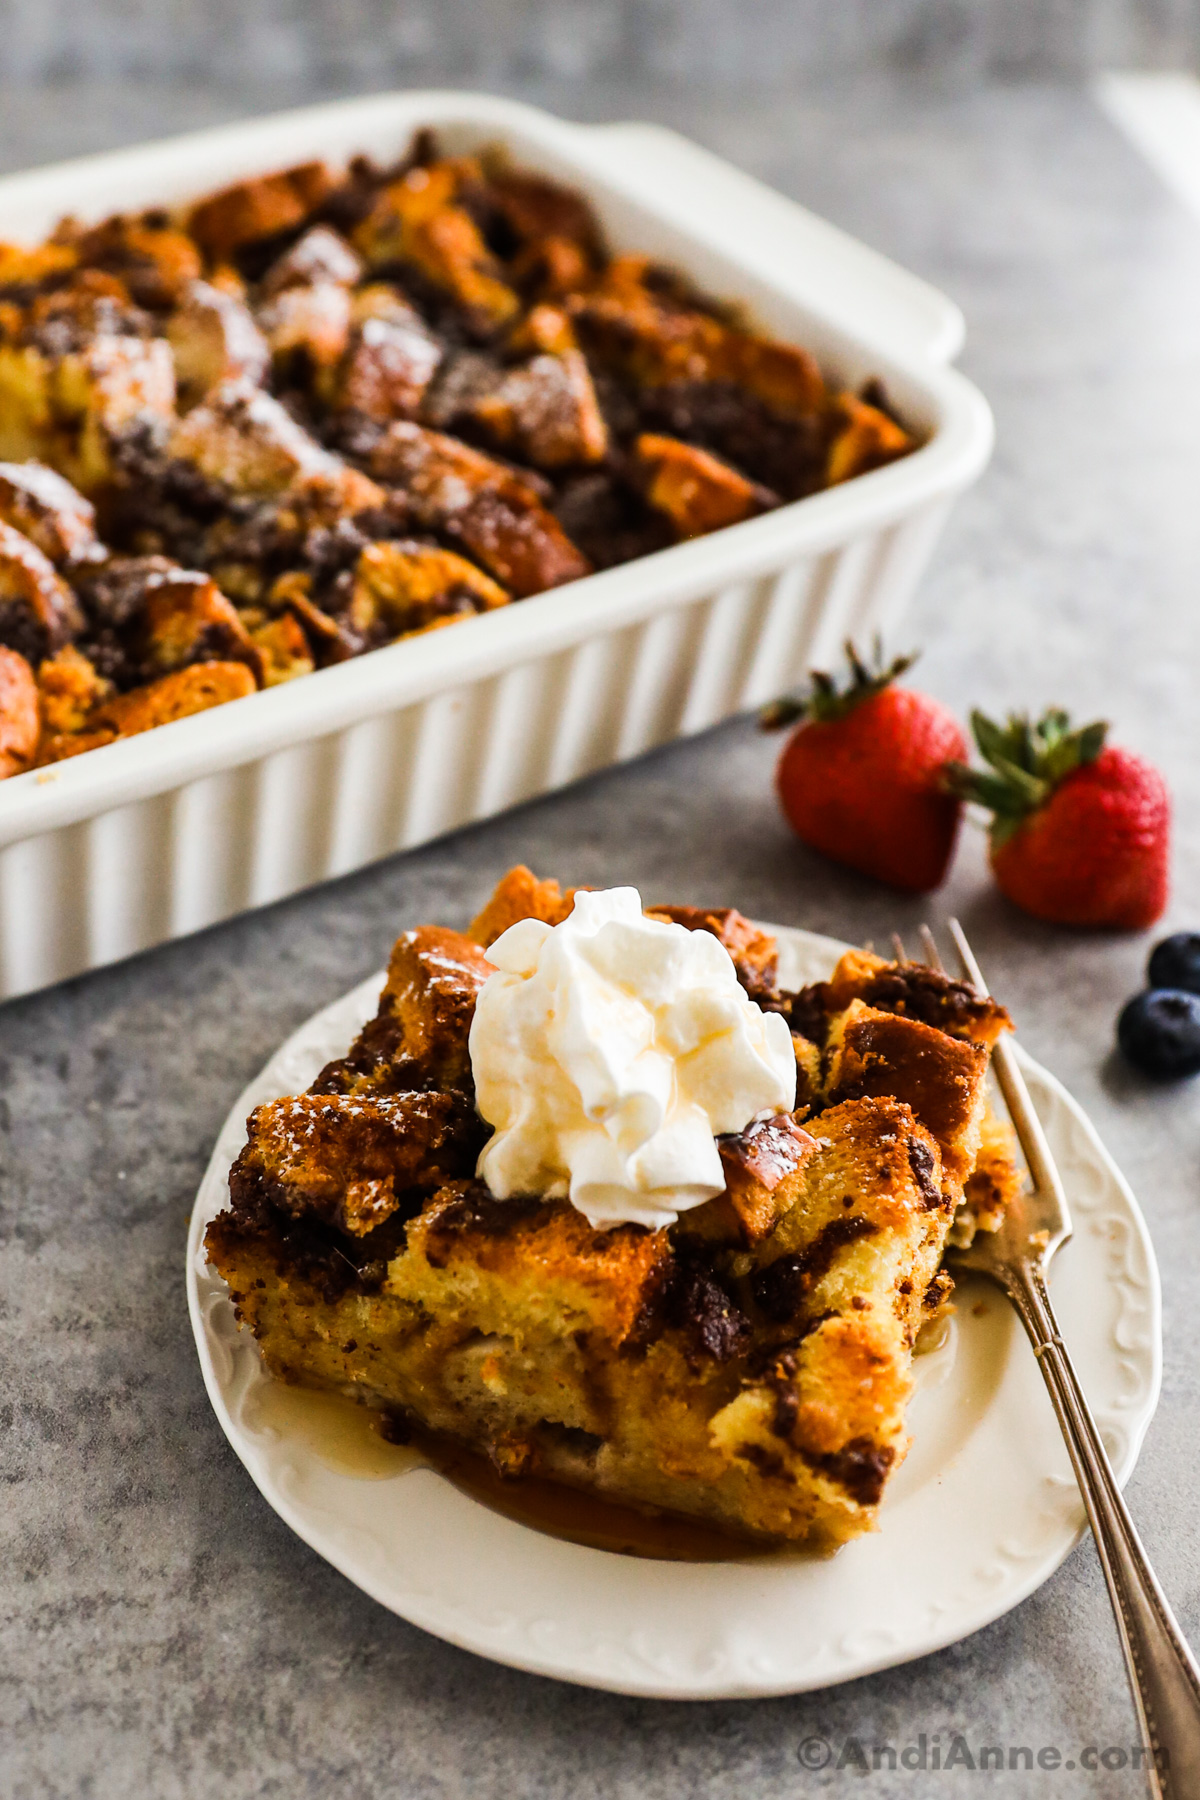 a slice of french toast casserole recipe on a plate with whipped cream. Casserole recipe in background with strawberries and blueberries beside.